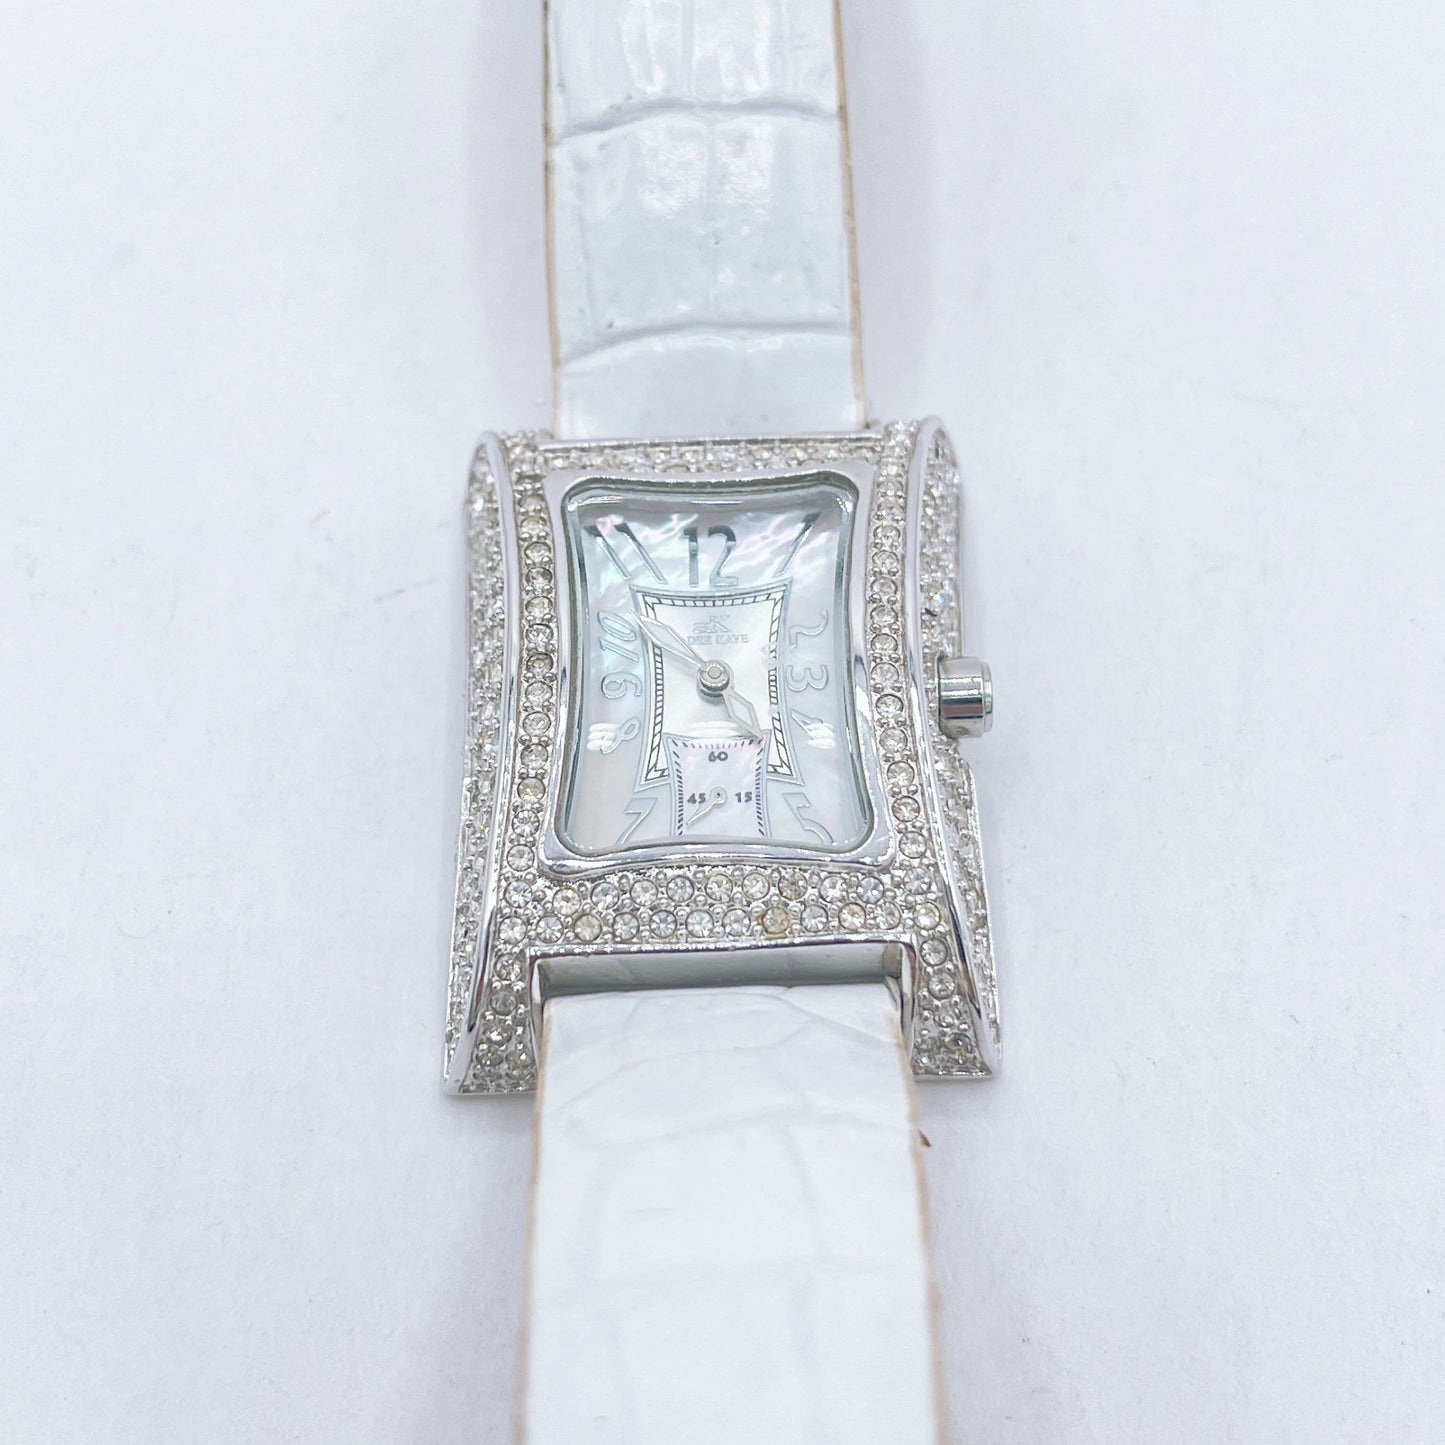 Adee Kaye Silver Swarovski Crystals Mother of Pearl Rectangle Face Stainless Steel White Leather Quartz Watch